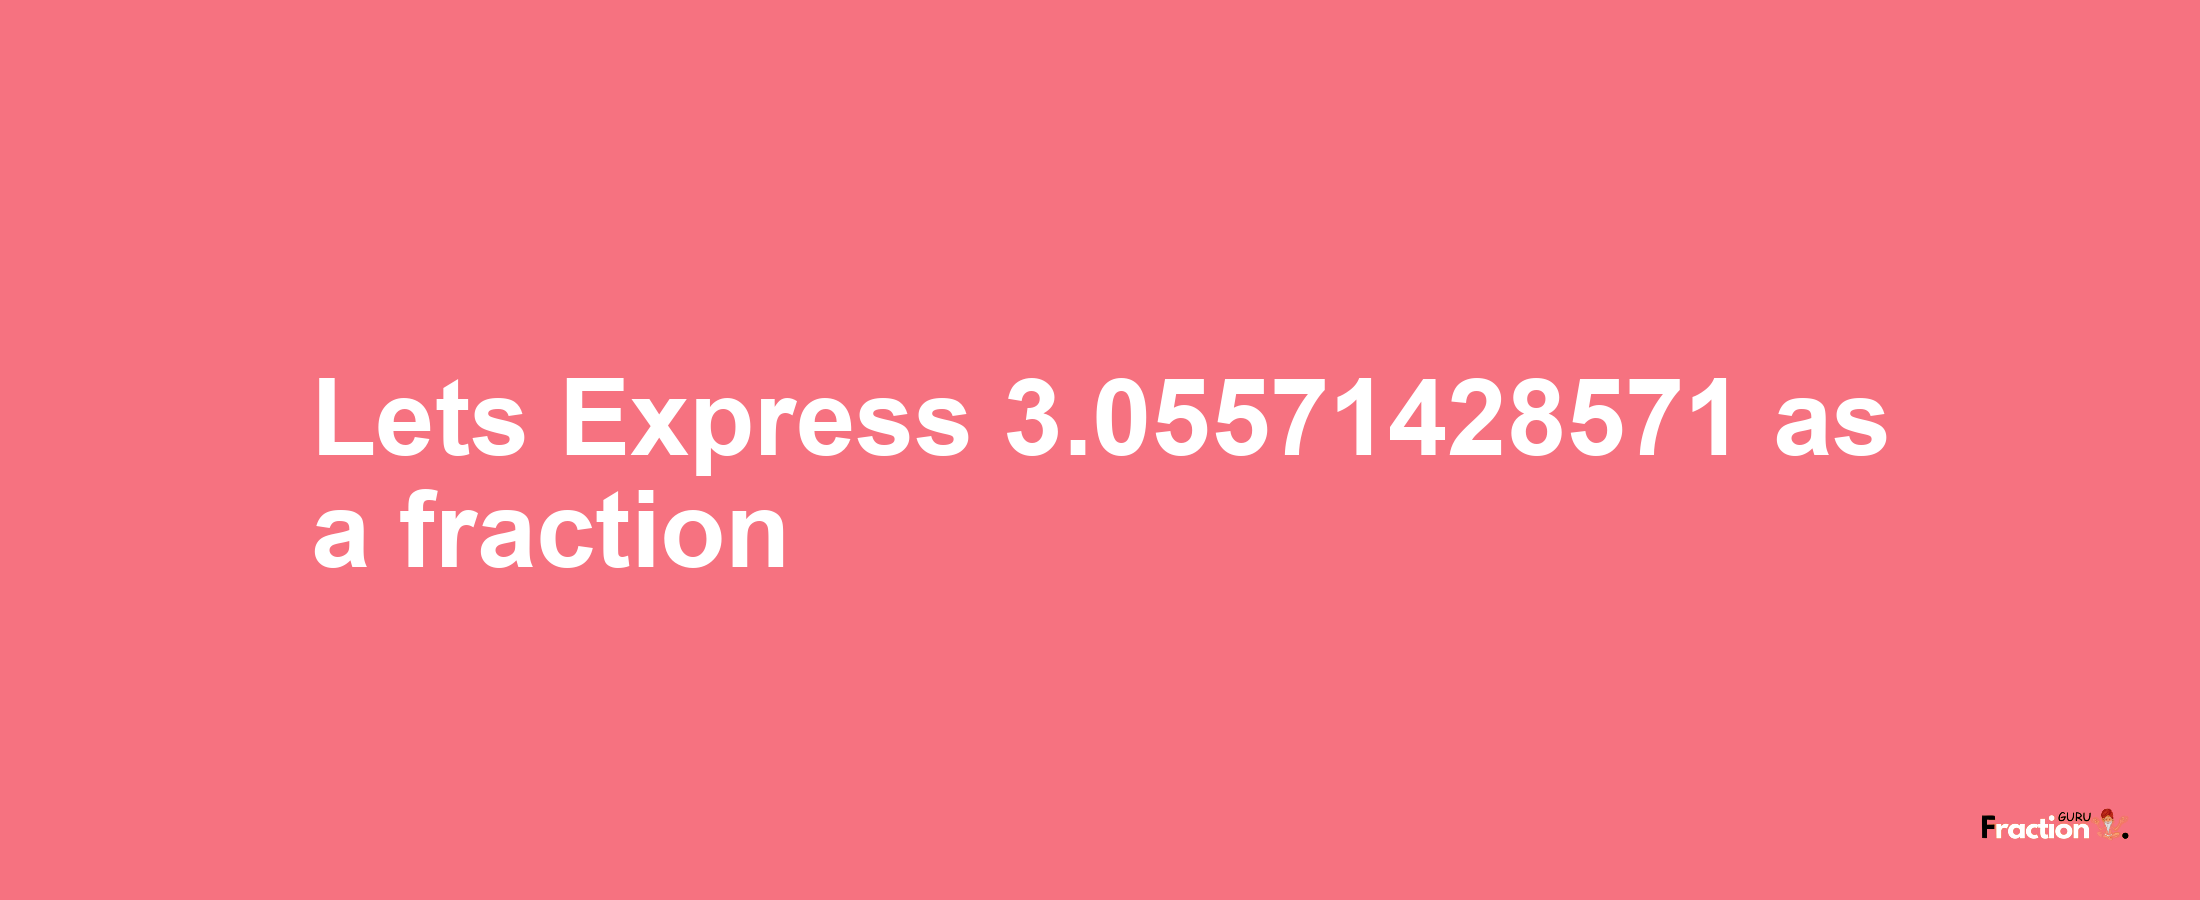 Lets Express 3.05571428571 as afraction